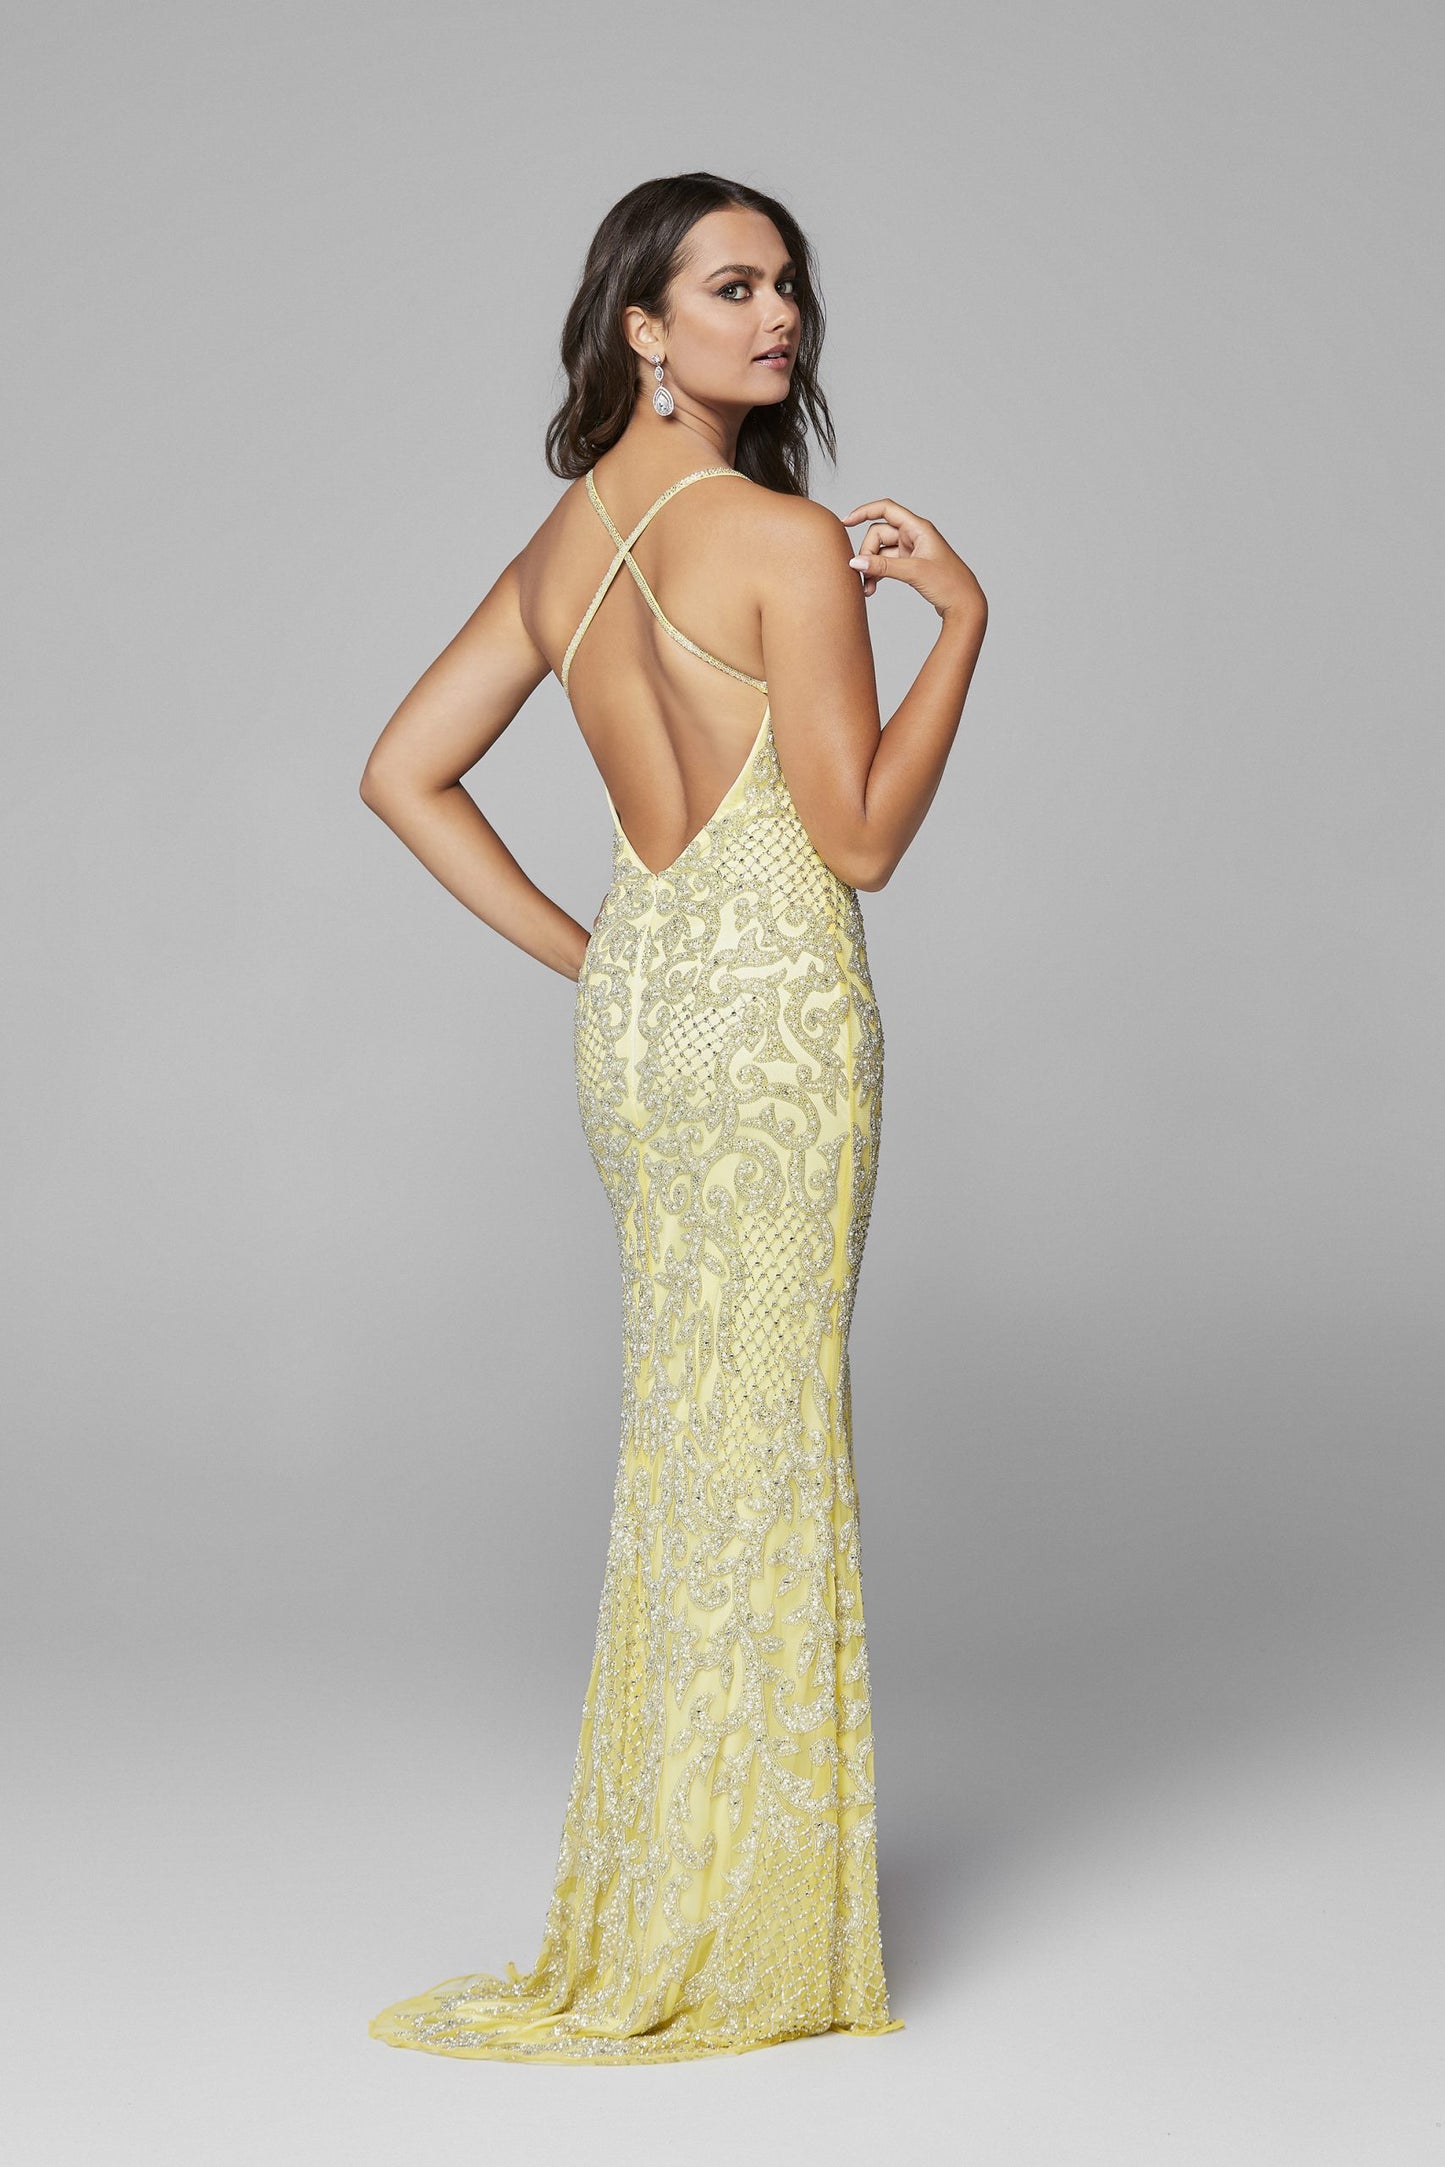 Primavera Couture 3214 Long Fitted Fully Beaded & Embellished formal evening gown. Prom Dress, Pageant Gown Evening gown. Backless with thigh slit and deep v neckline embellished spaghetti straps. v neckline criss cross back fully beaded prom dress with side slit. Great Wedding reception dress in Ivory!  Available Colors: YELLOW, FORREST GREEN, LILAC, POWDER BLUE, TEAL, BLUSH SILVER, RASPBERRY, IVORY, BLACK, BURGUNDY, MIDNIGHT  Available Sizes: 00-18